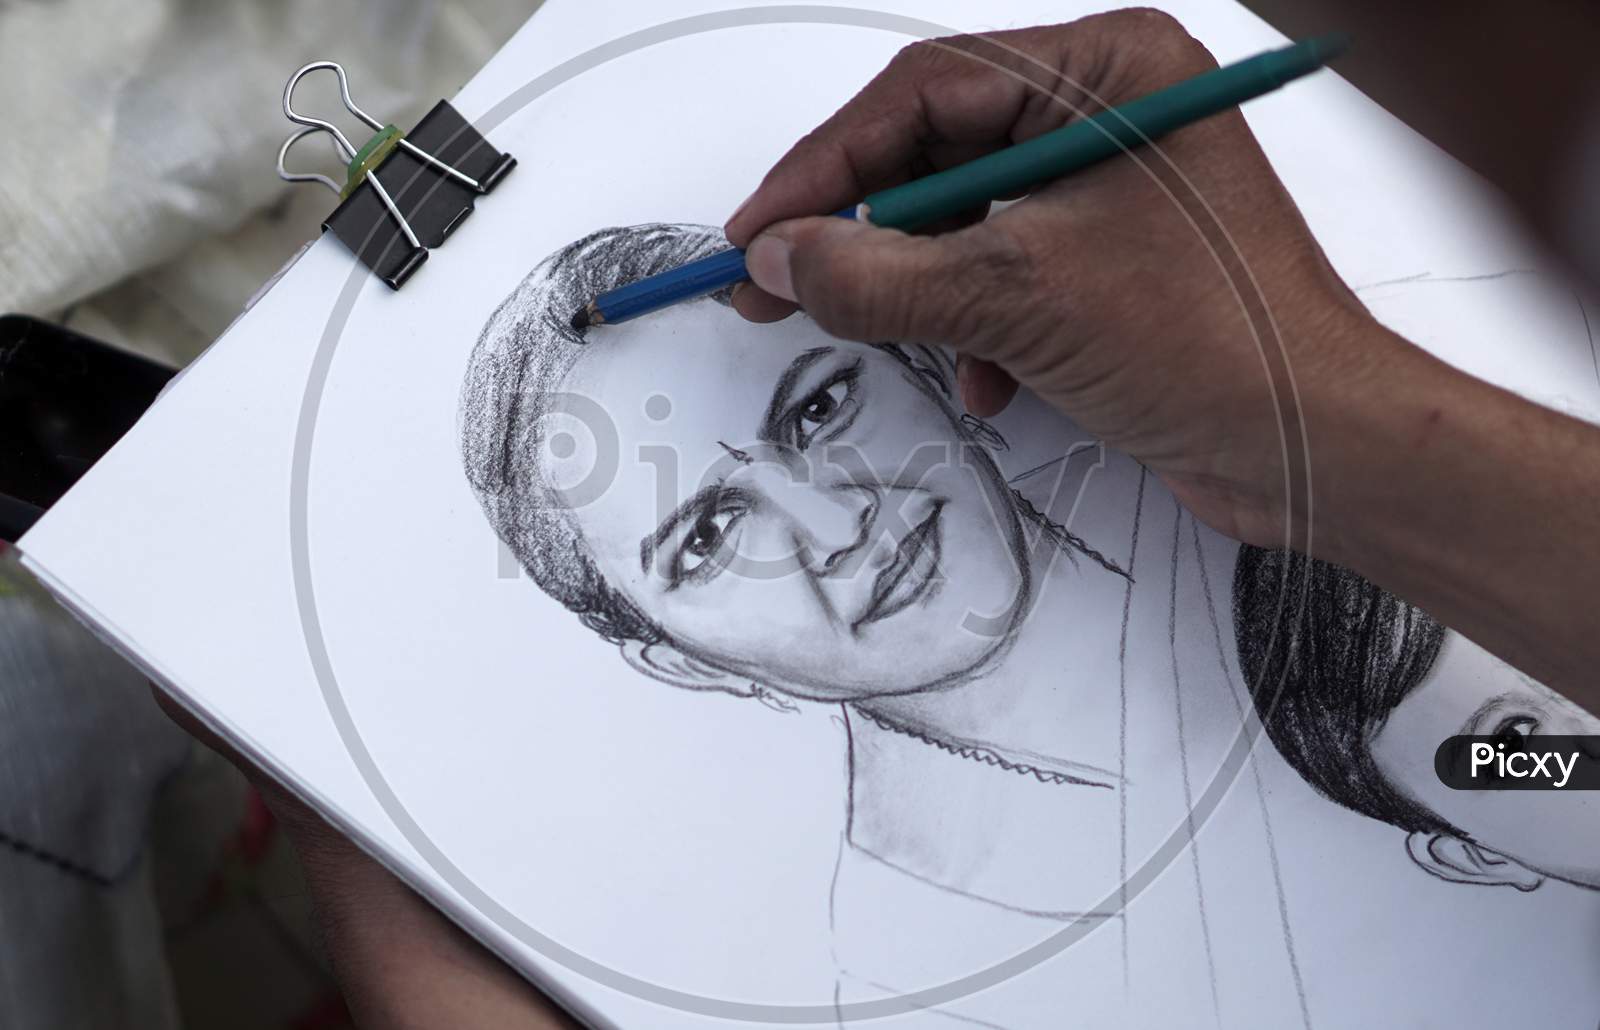 Indian Artist Drawing Pencil Portrait Of A Woman In A Public Place